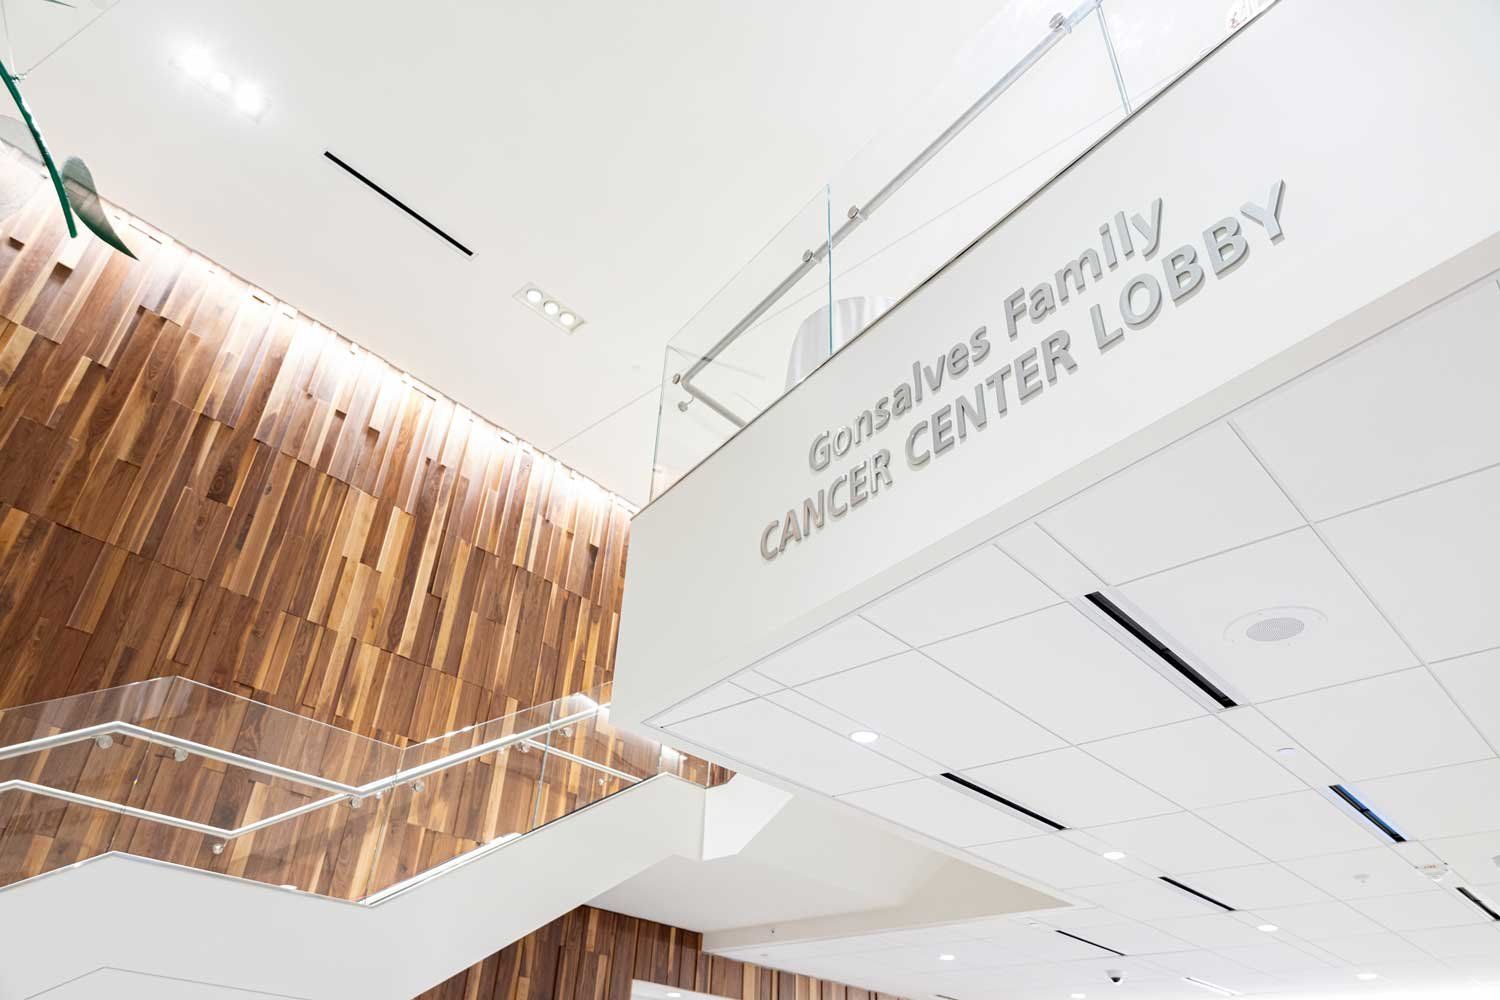 The interior of the Behring Pavilion, showing the Gonsalves Family Cancer Center Lobby, which has a modern wood-paneled wall, and white stairs with glass panes.